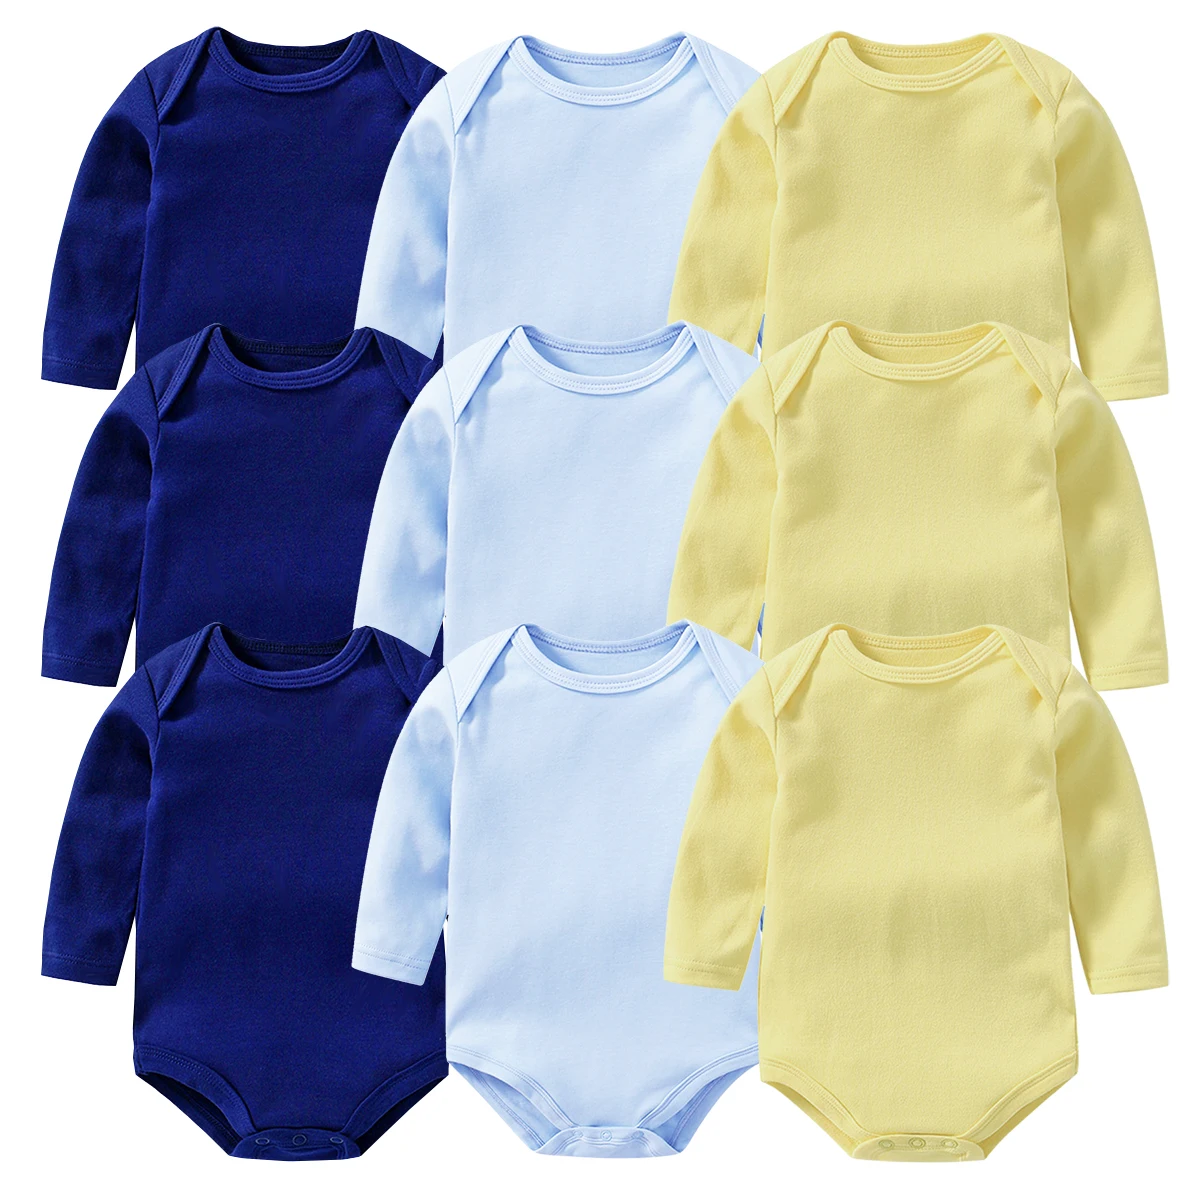 

100% Cotton Newborn Baby Bodysuits Long Sleeved Jumpers Toddler Autumn Rompers Sleepers Spring Onesies Infantil Jumpsuits Ropa